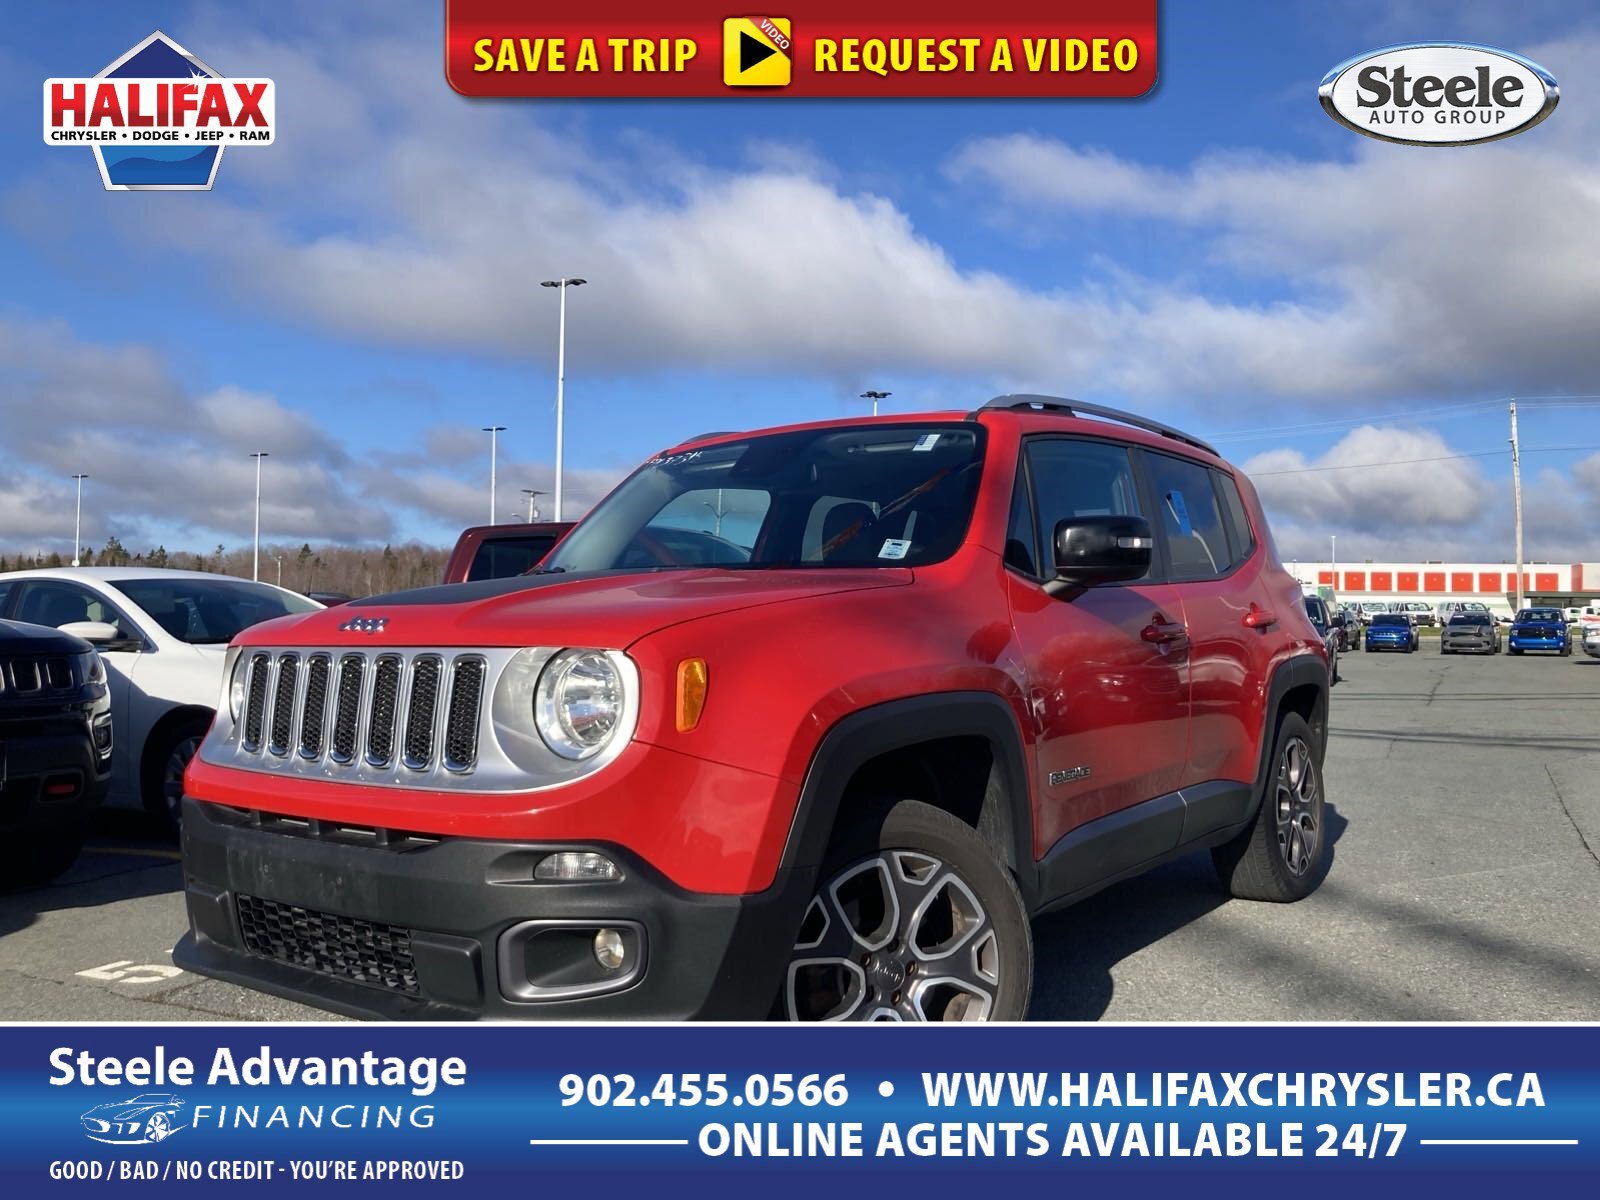 2015 Jeep Renegade Limited - LOW KM, 4WD, HEATED LEATHER SEATS AND WH